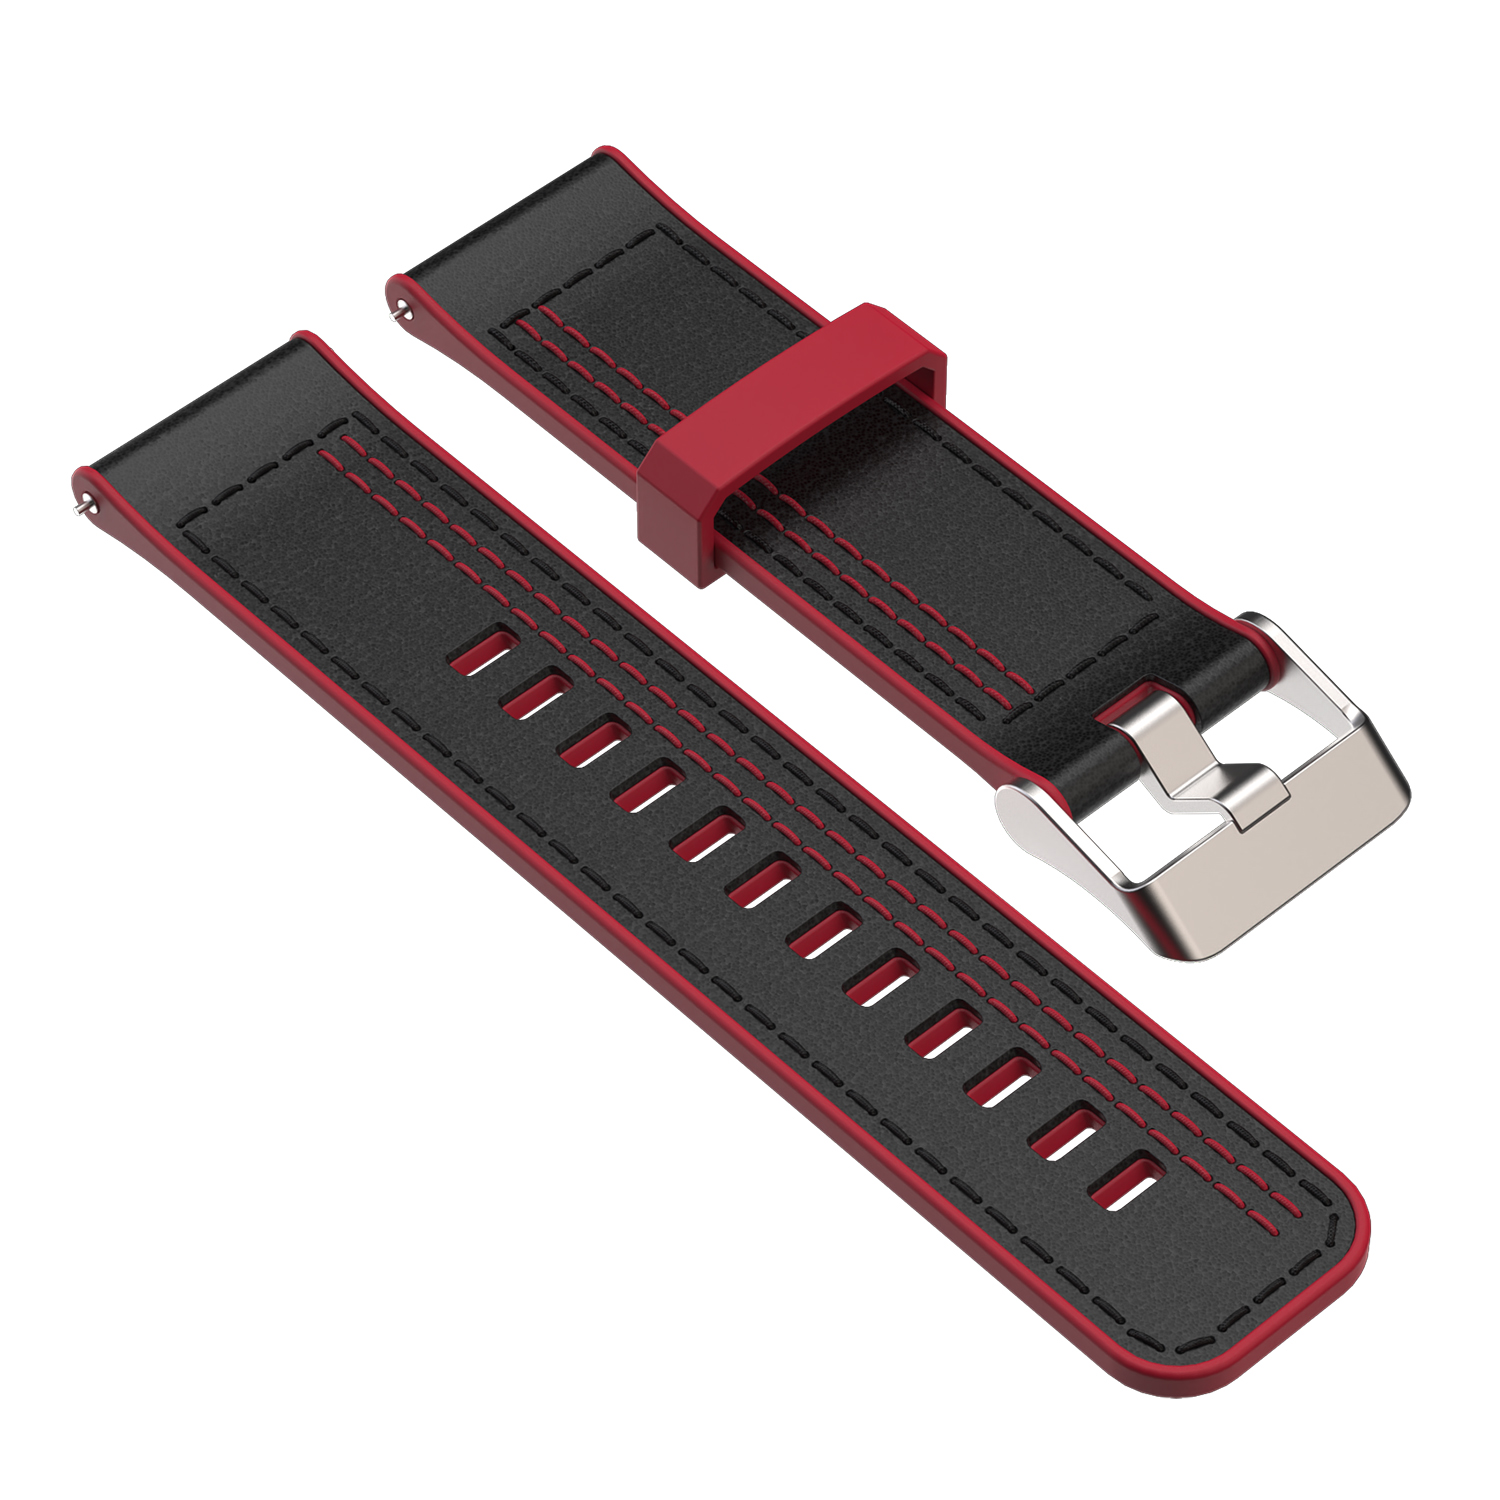 Find Bakeey 22mm Silicone Leather Replacement Strap Smart Watch Band For Huawei GT 2 46MM/Honor Magic 2 46MM for Sale on Gipsybee.com with cryptocurrencies